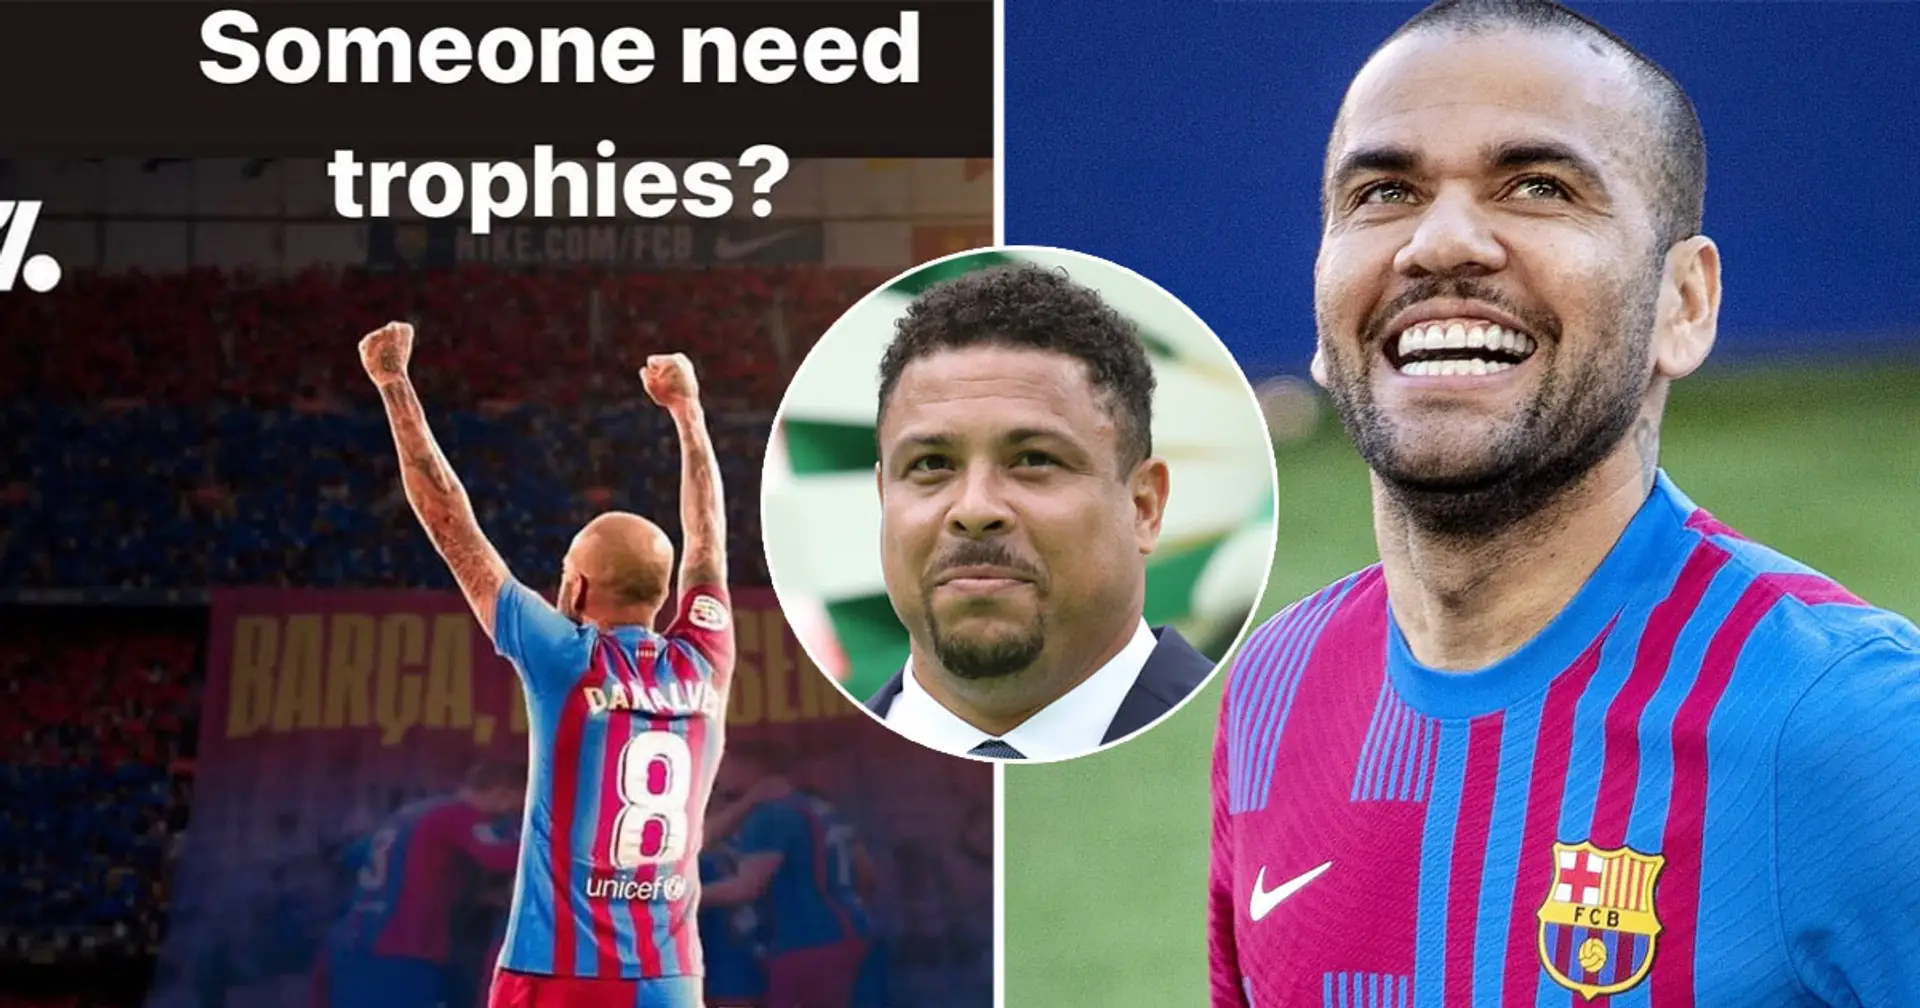 'Someone need trophies?': Dani Alves advertises himself to potential suitors with Instagram post